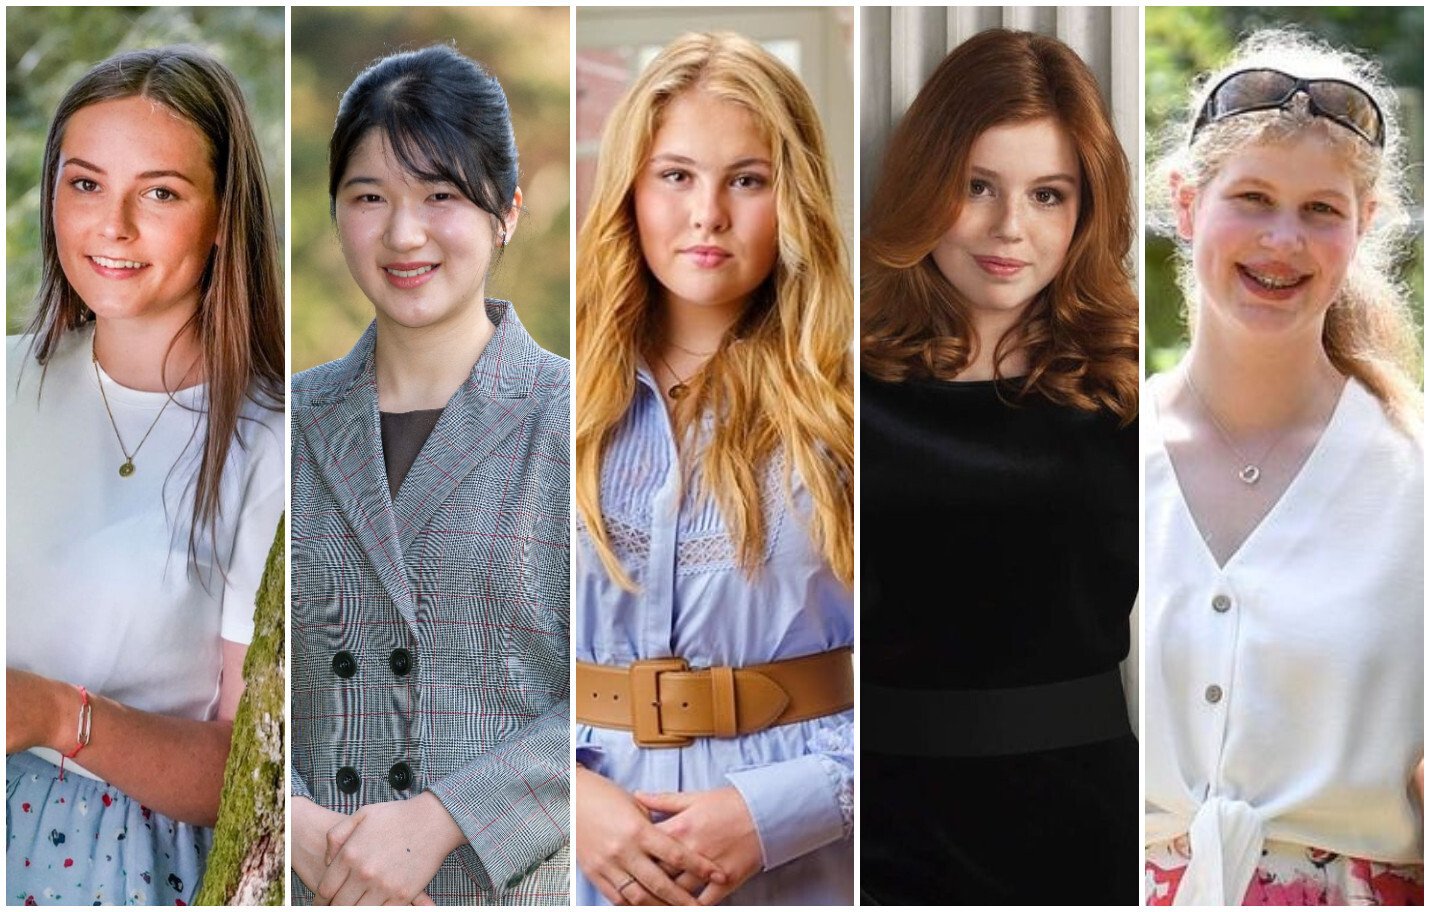 The lives of these five young royals will change phenomenally as they come of age. Photos: @princess.ingrid.alexandra/Instagram. AP, @princess.catharinaamalia, @royally_yourz, @louise_windsor2003/Instagram